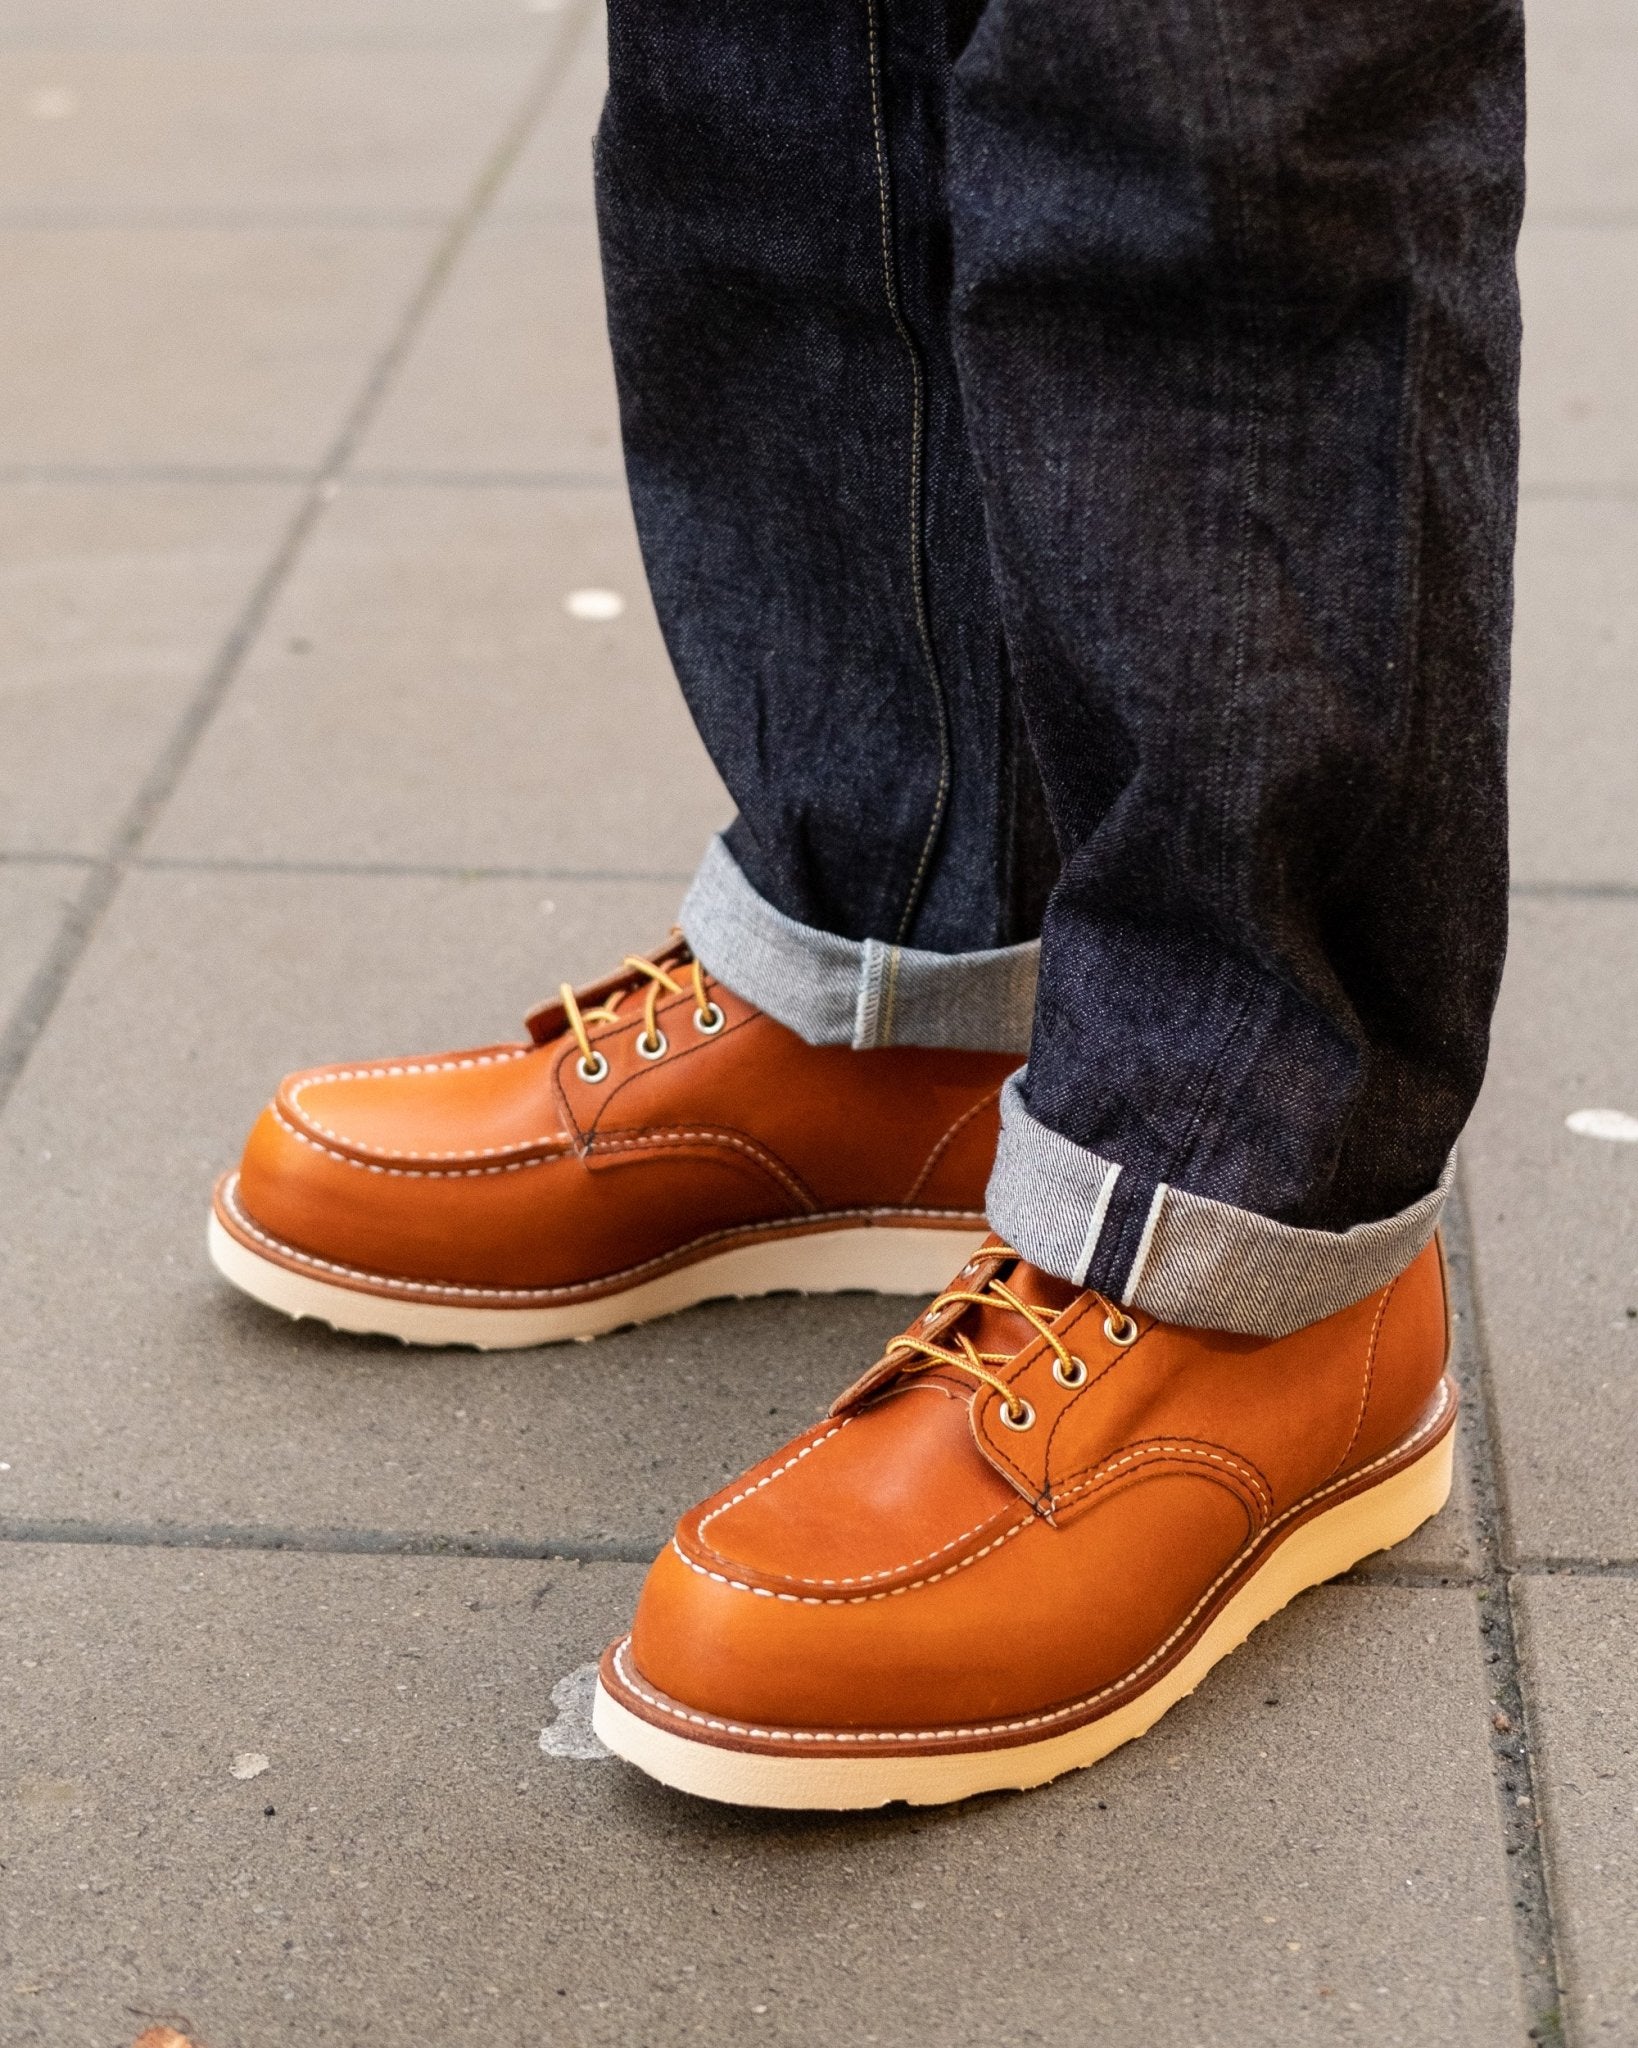 RED WING SHOES | 875 Classic Moc Toe in Oro Legacy | MEADOW